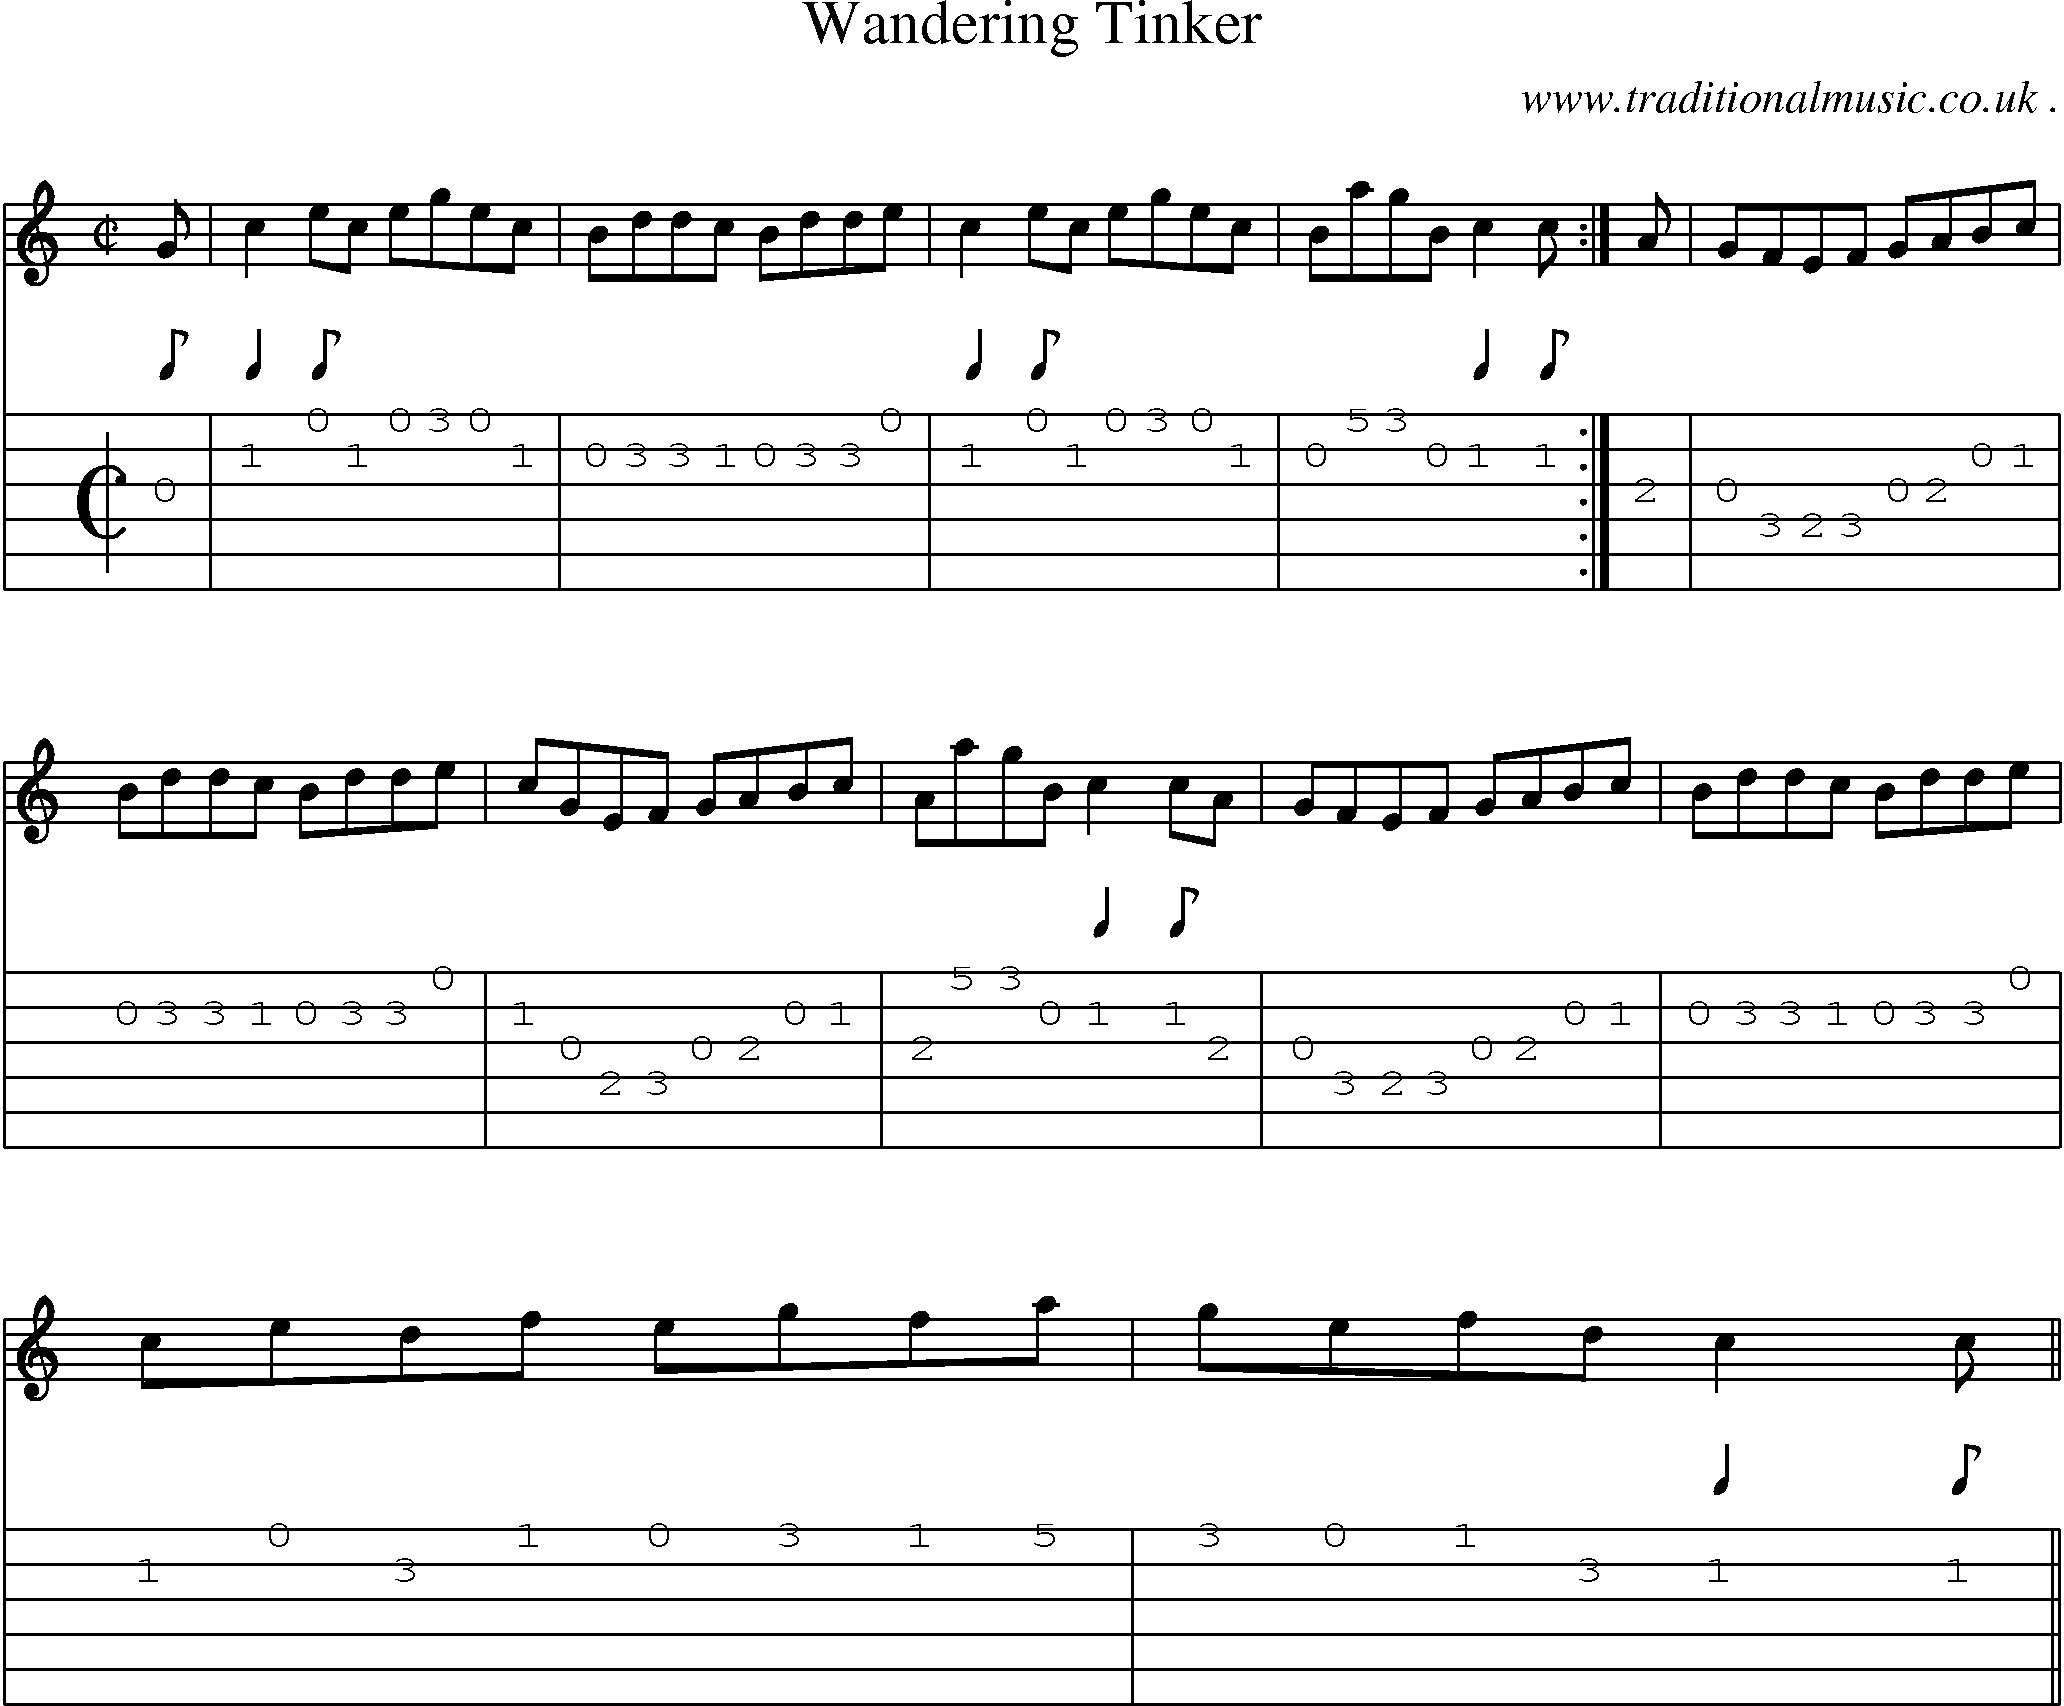 Sheet-music  score, Chords and Guitar Tabs for Wandering Tinker